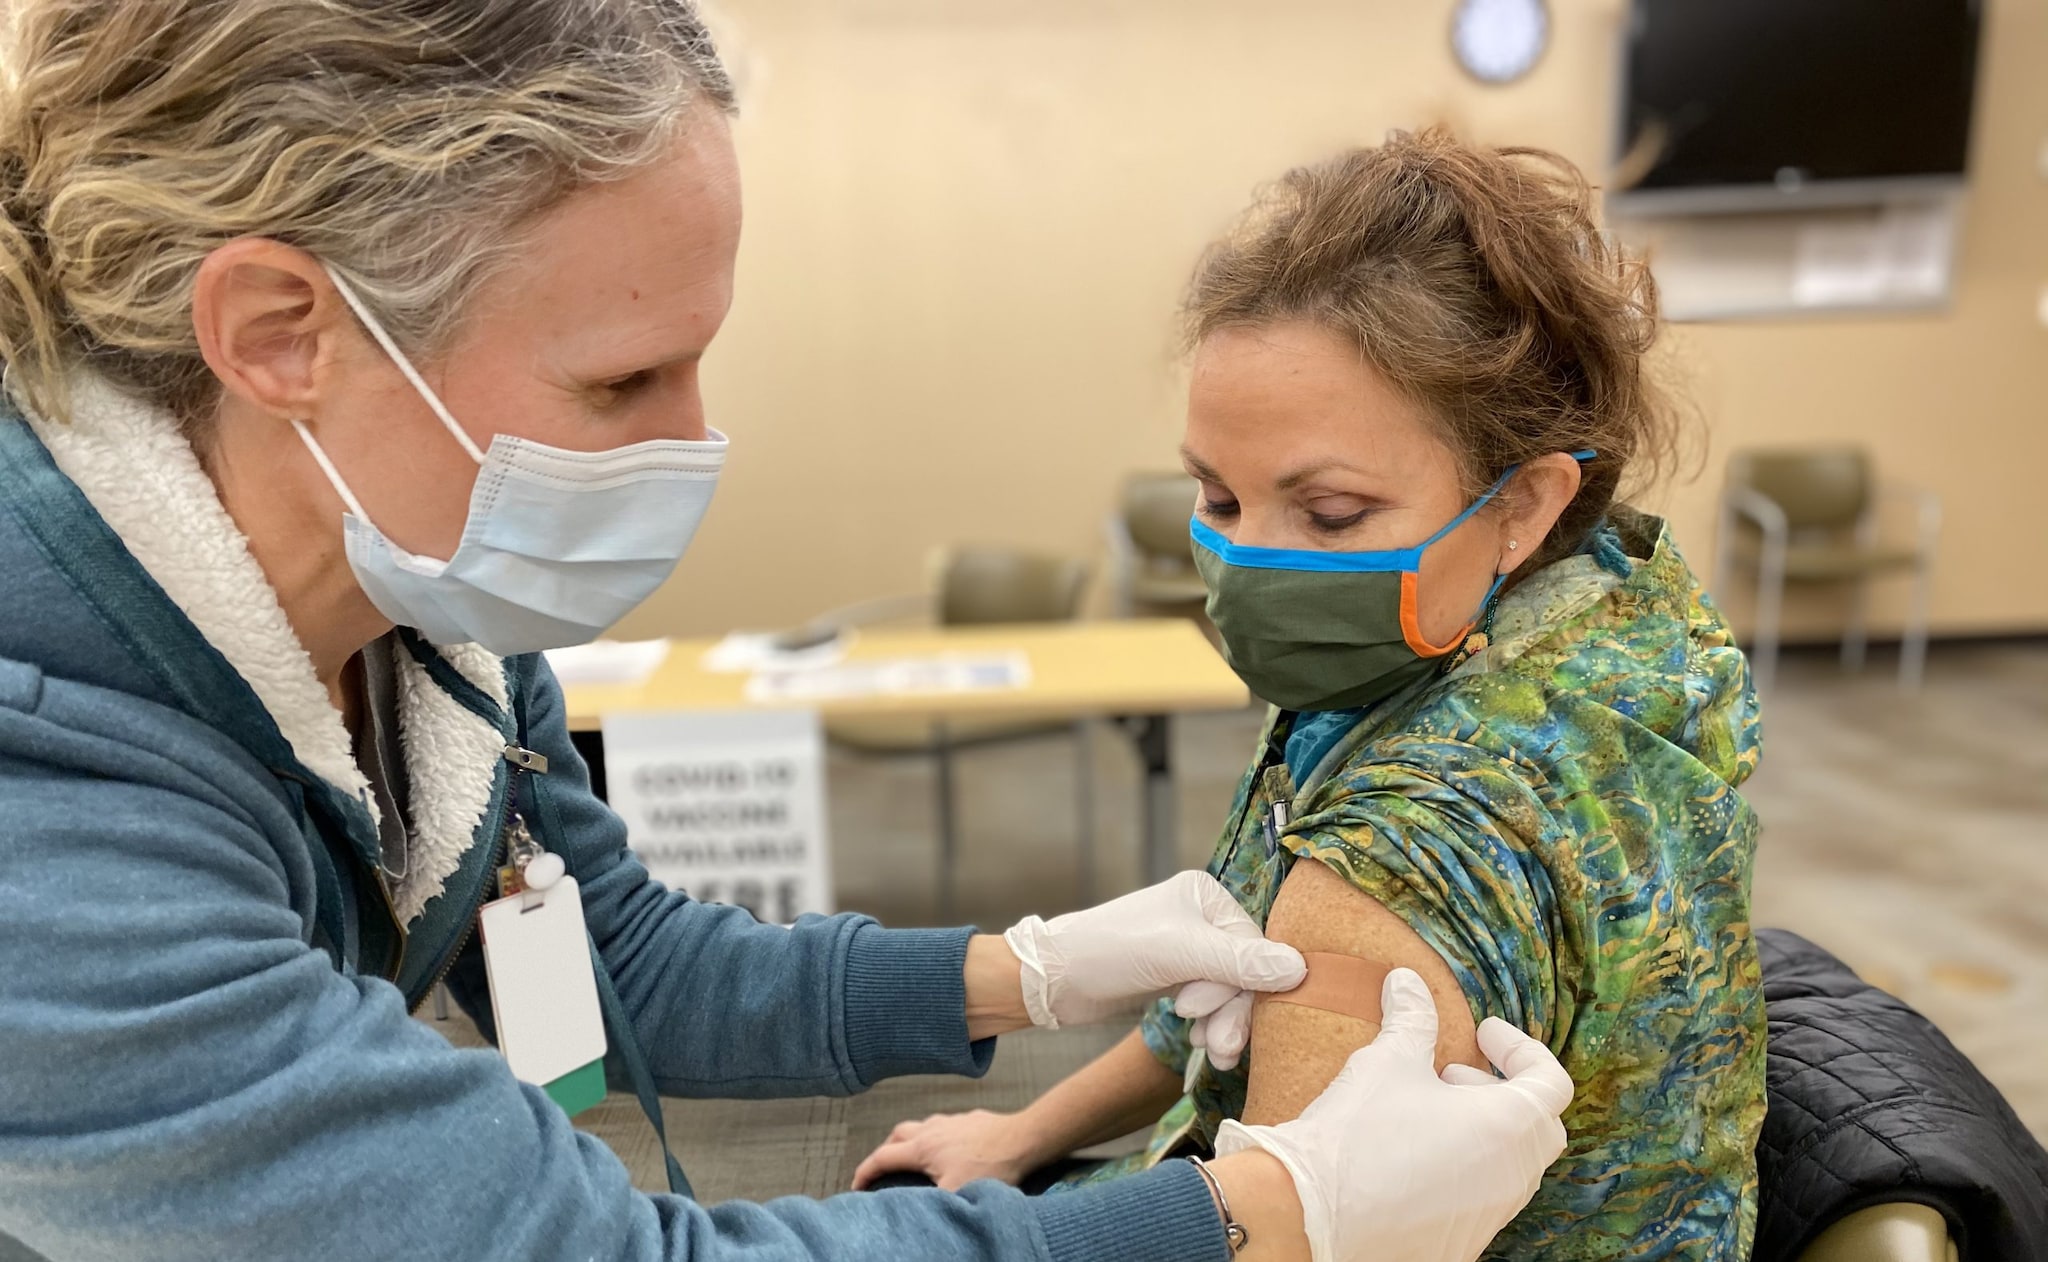 Healthcare professional places band aid on arm of recently vaccinated woman.